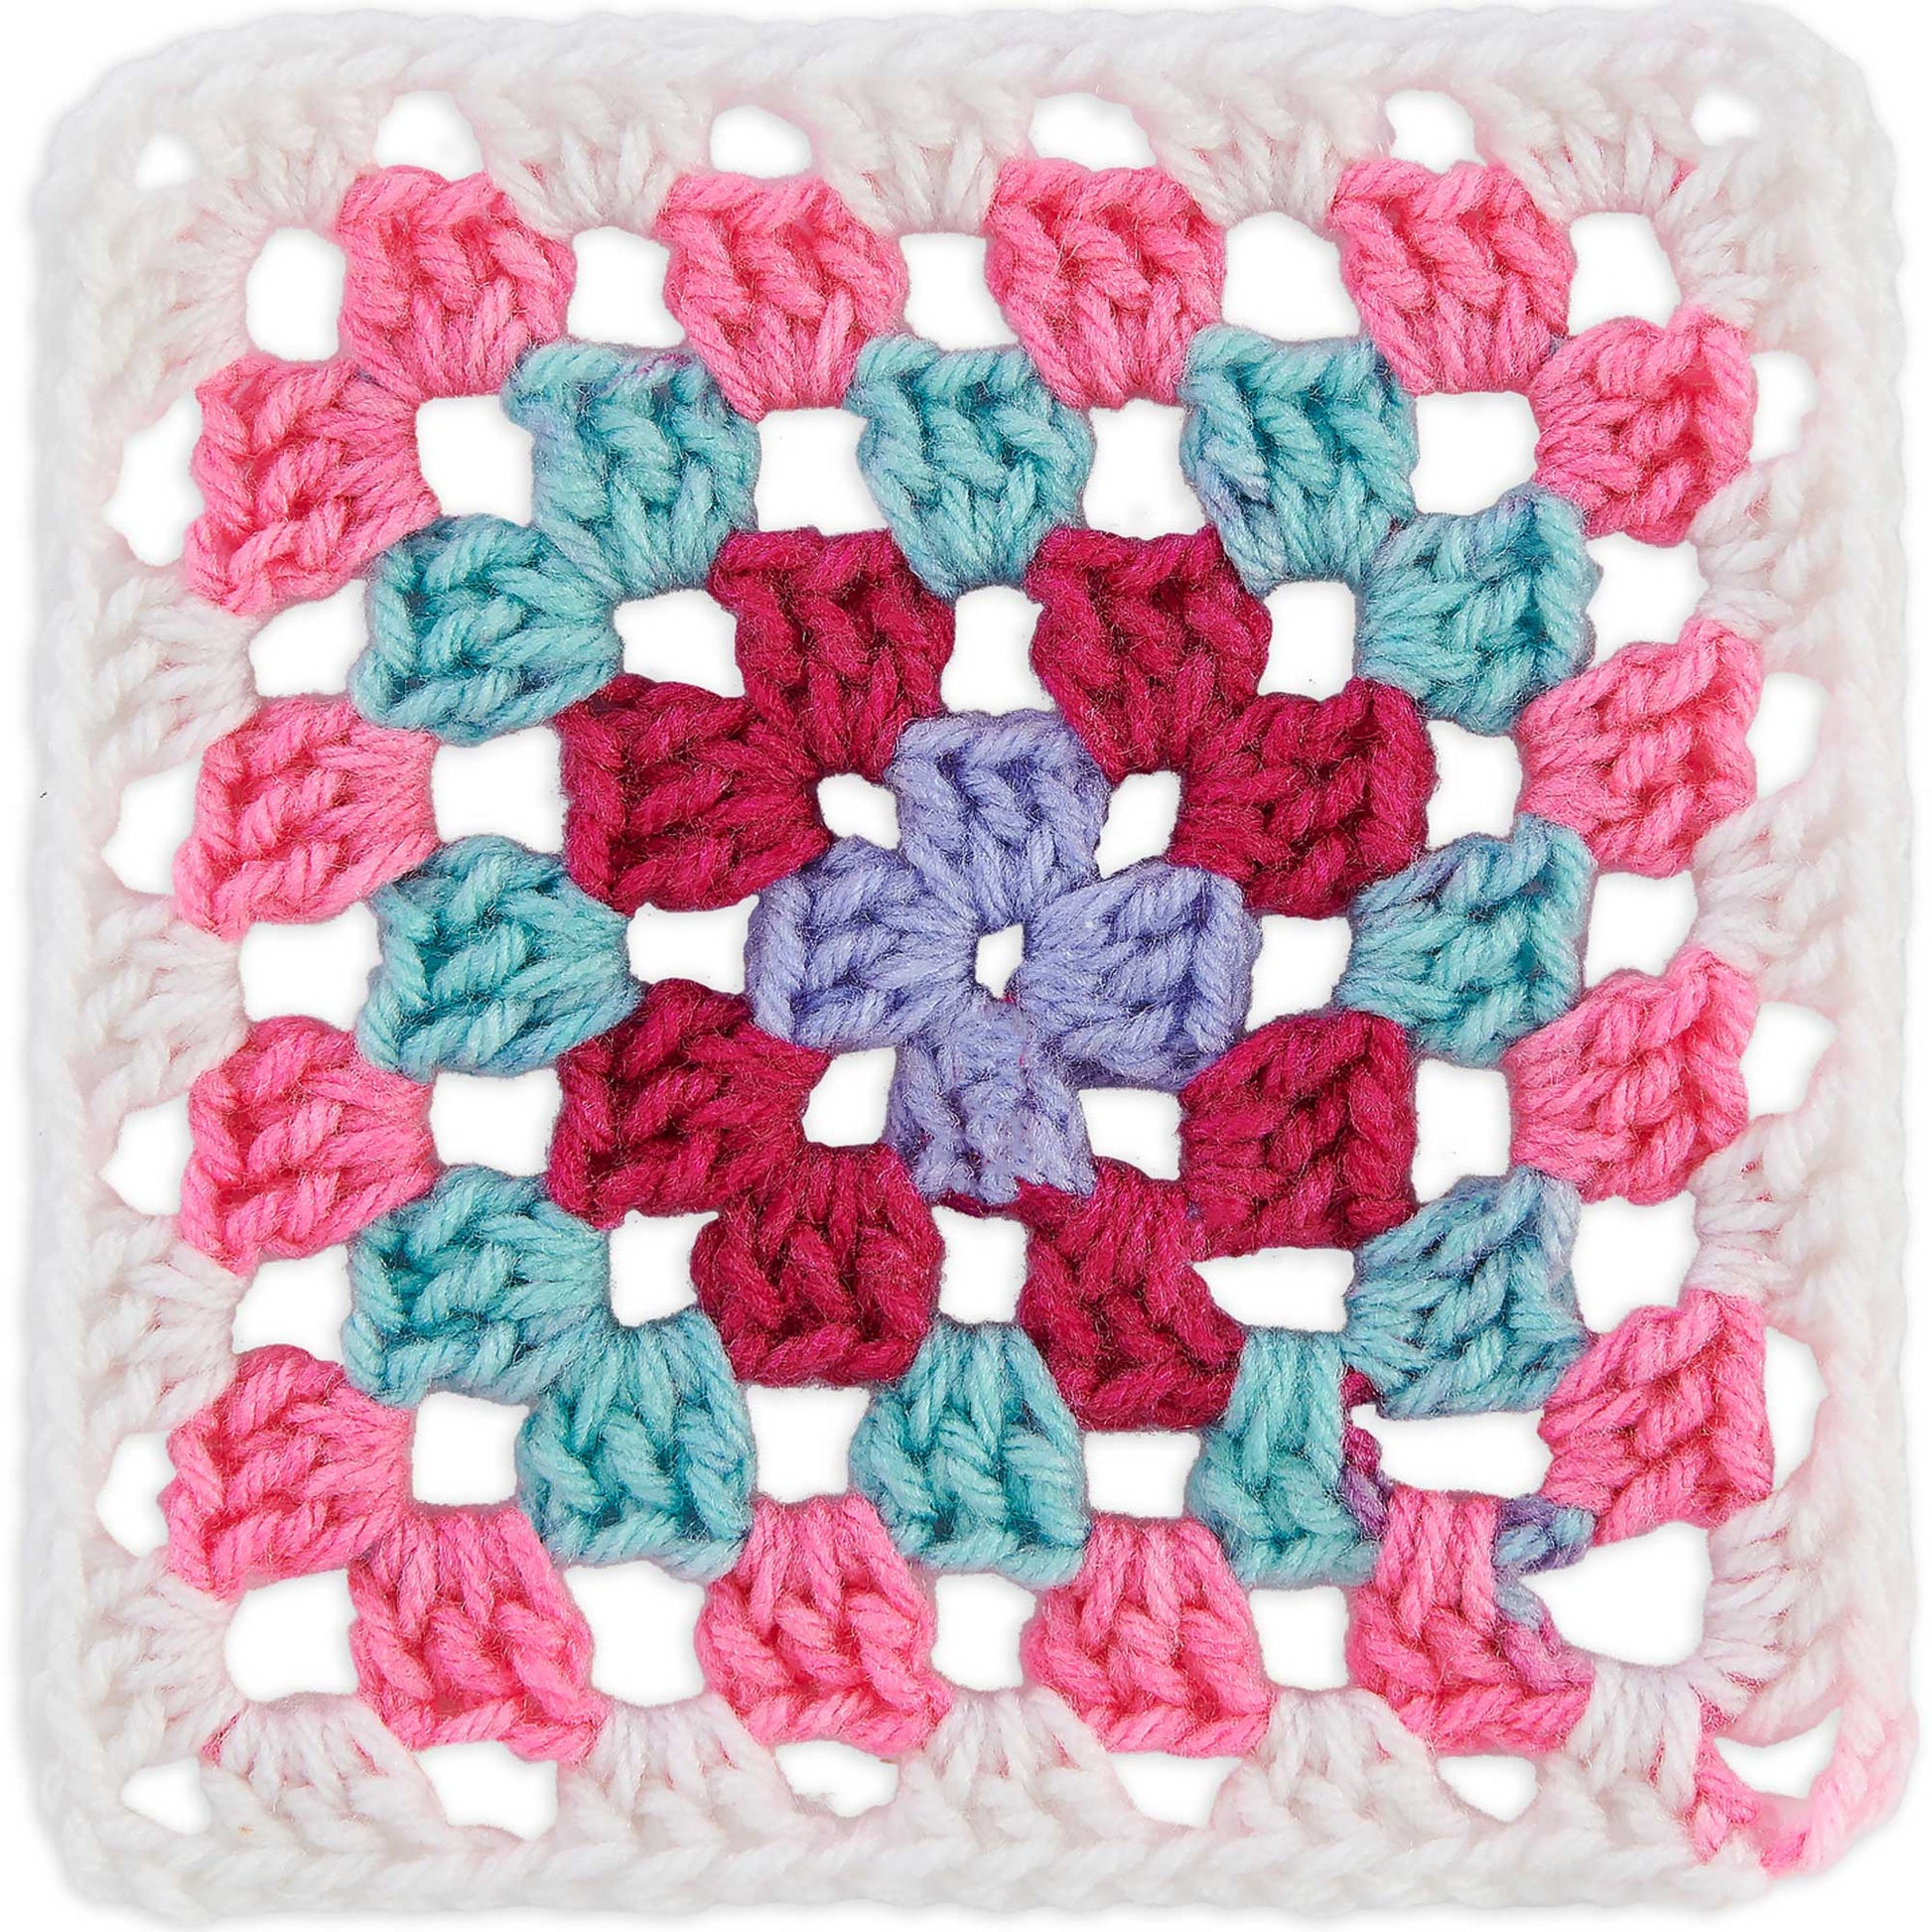 Review of Red Heart Granny Square yarn. #yarnspirations #redheart #red, yarn crochet